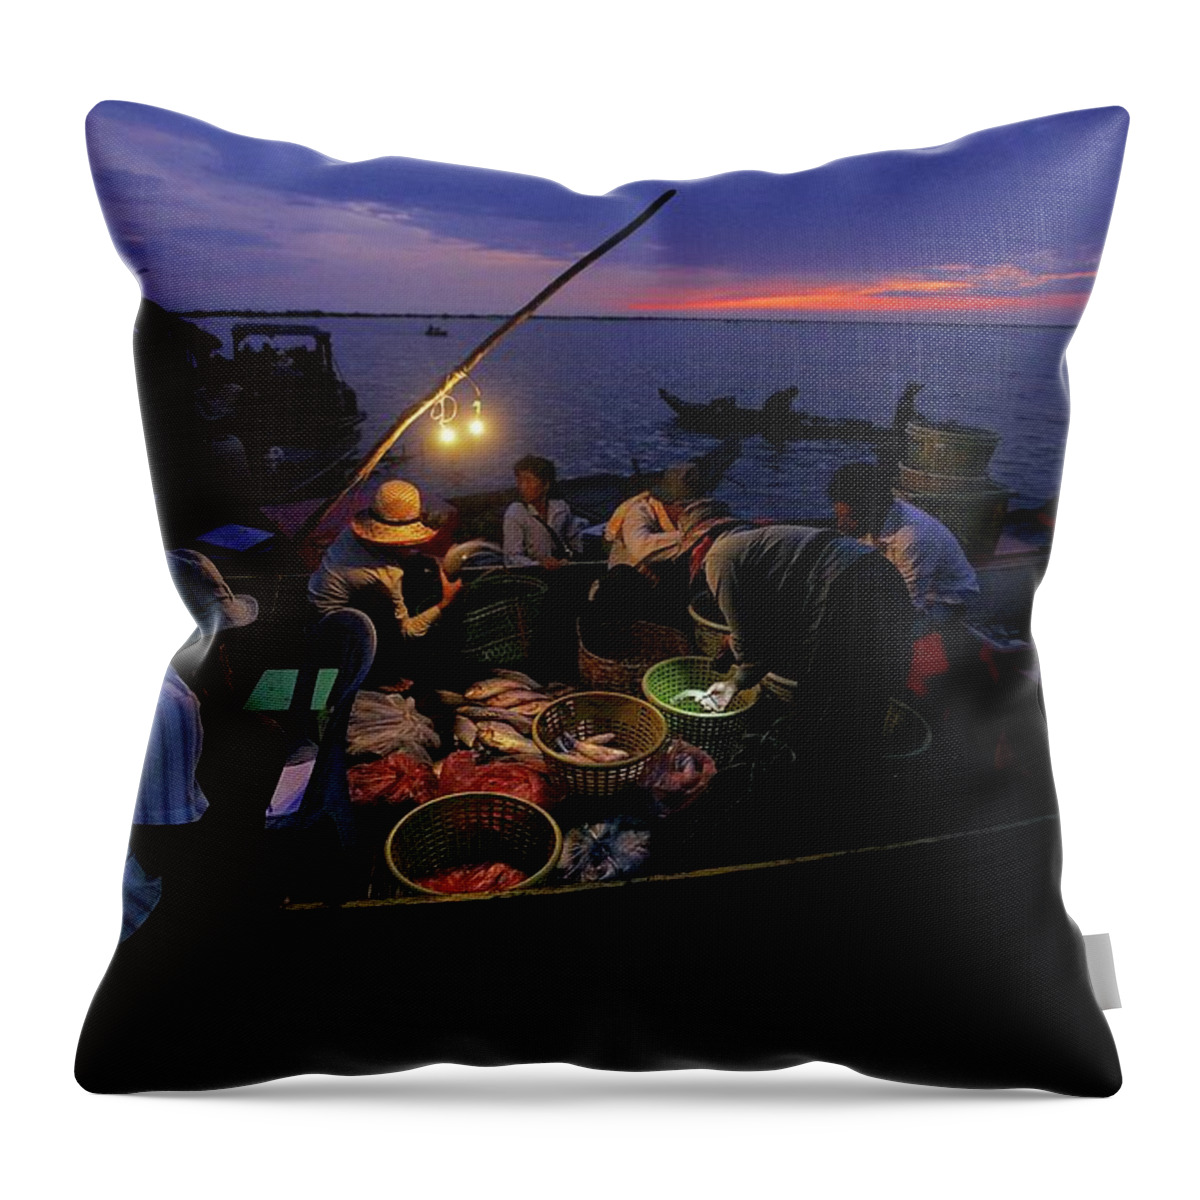 Dawn Throw Pillow featuring the photograph Fish Market At Night On Tonle Sap Lake by Timothy Allen